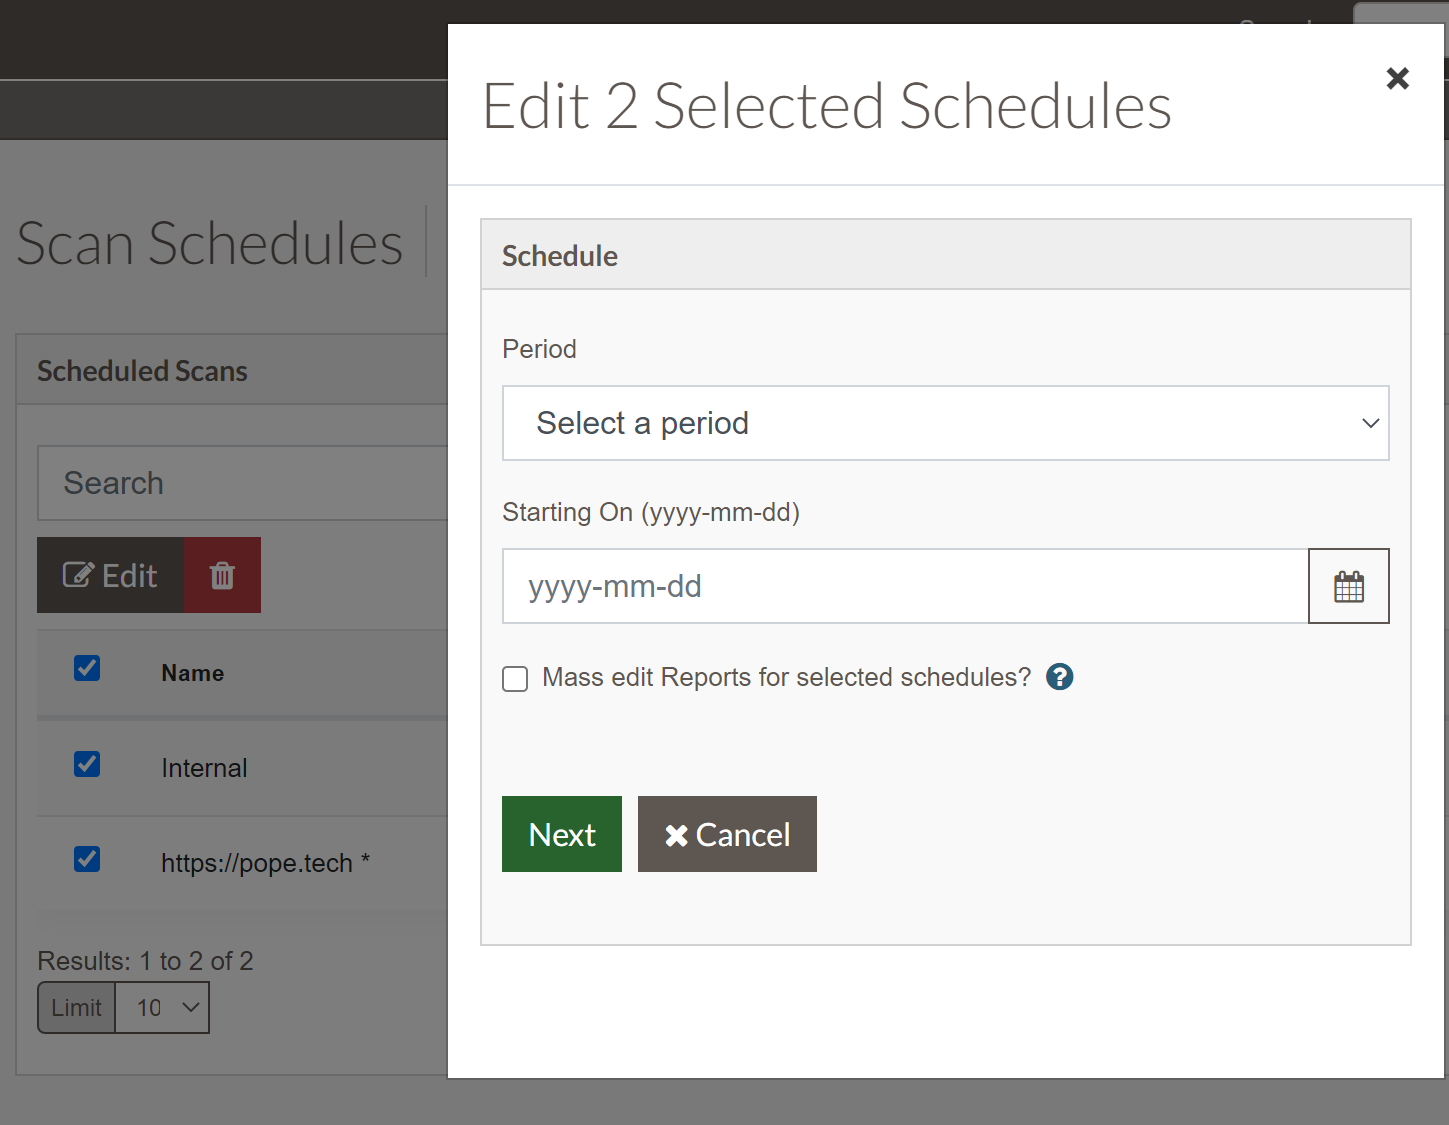 screenshot of editing schedule scans modal. Ability to edit the period, start date and reports.